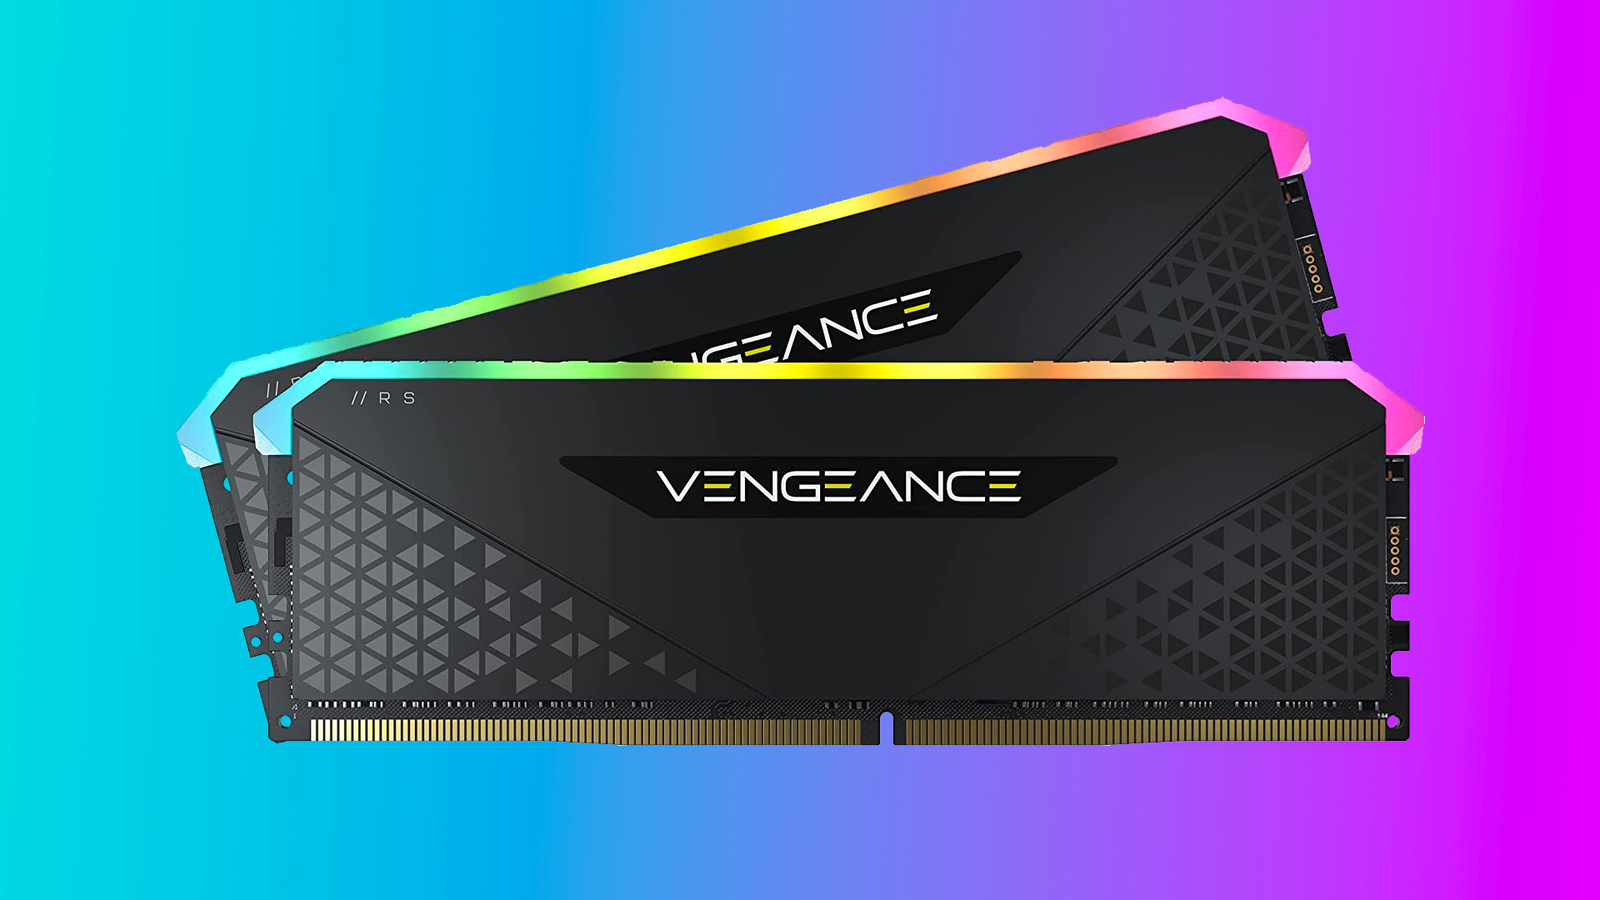 Grab 32GB of solid Corsair Vengeance RGB RS DDR4 RAM for £79 from